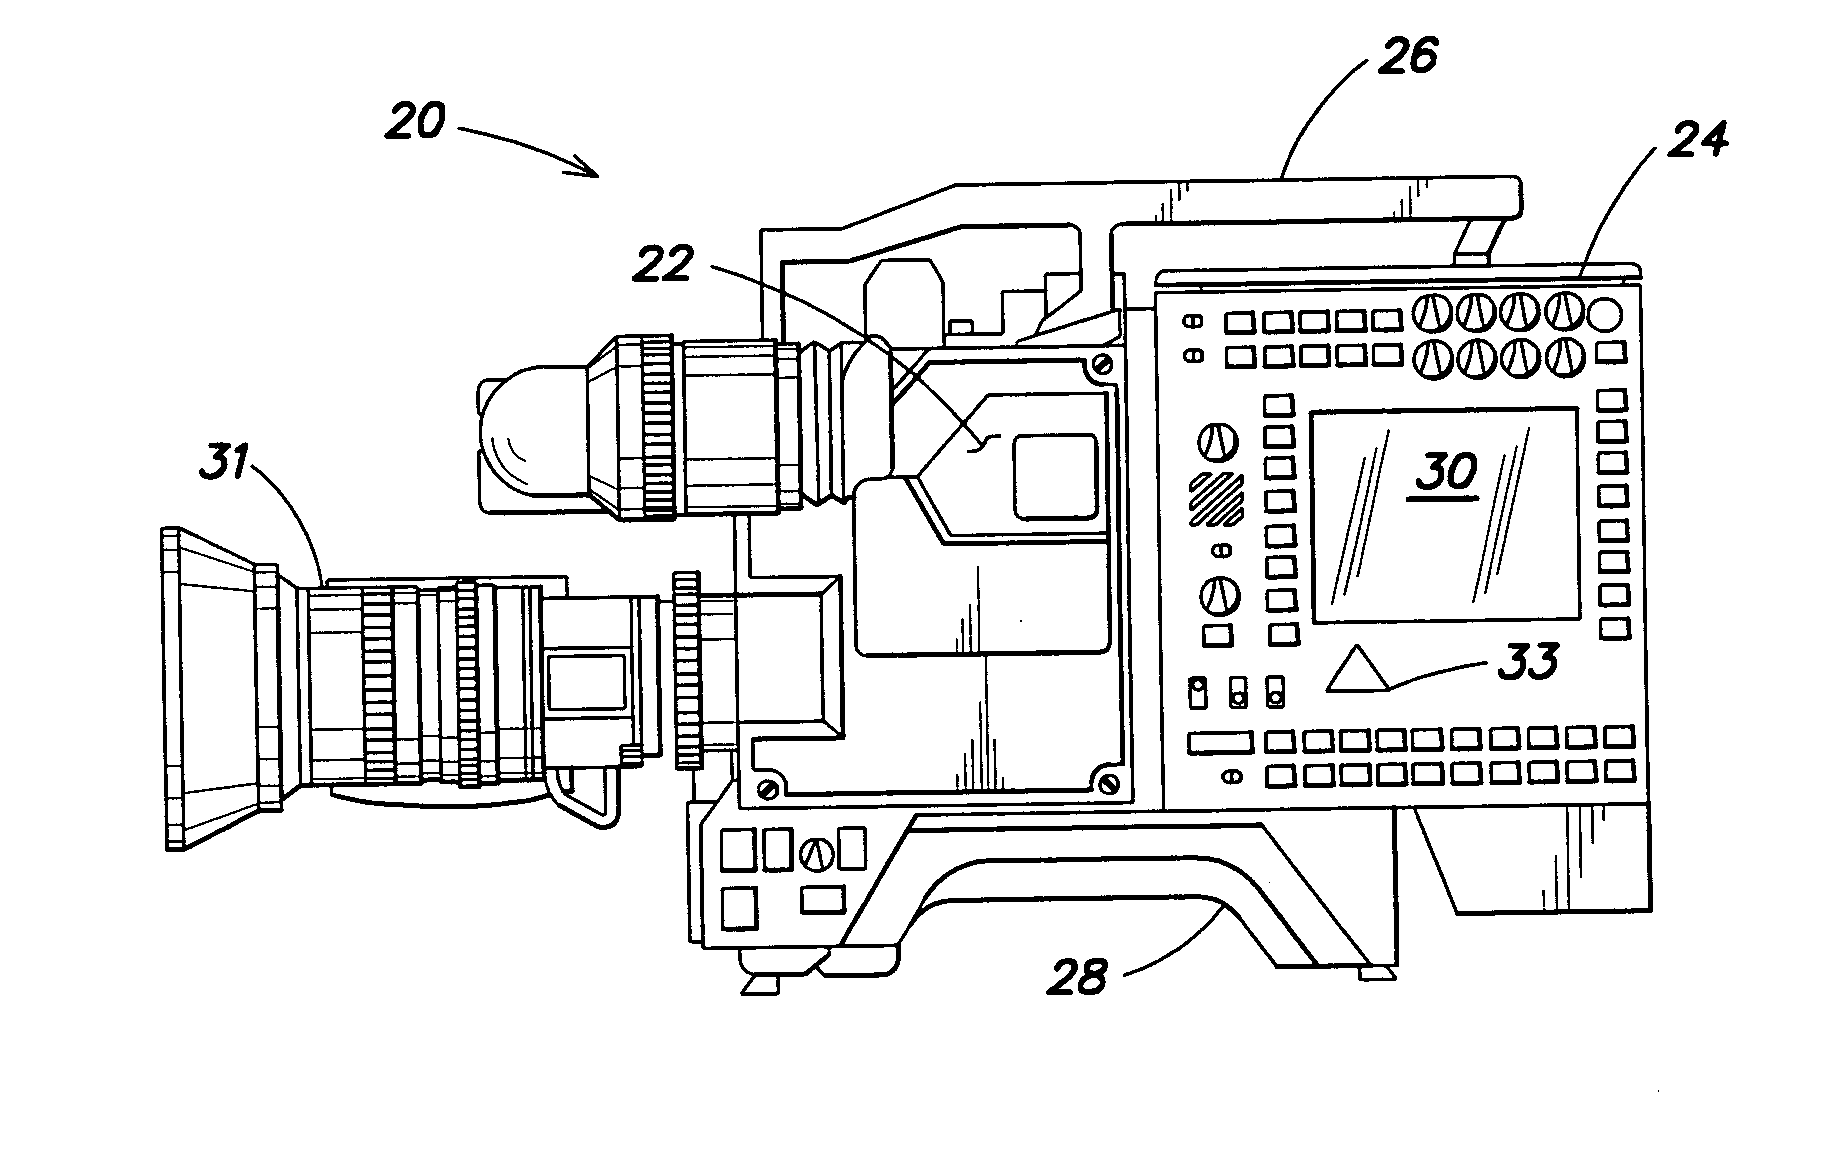 Combined editing system and digital moving picture recording system